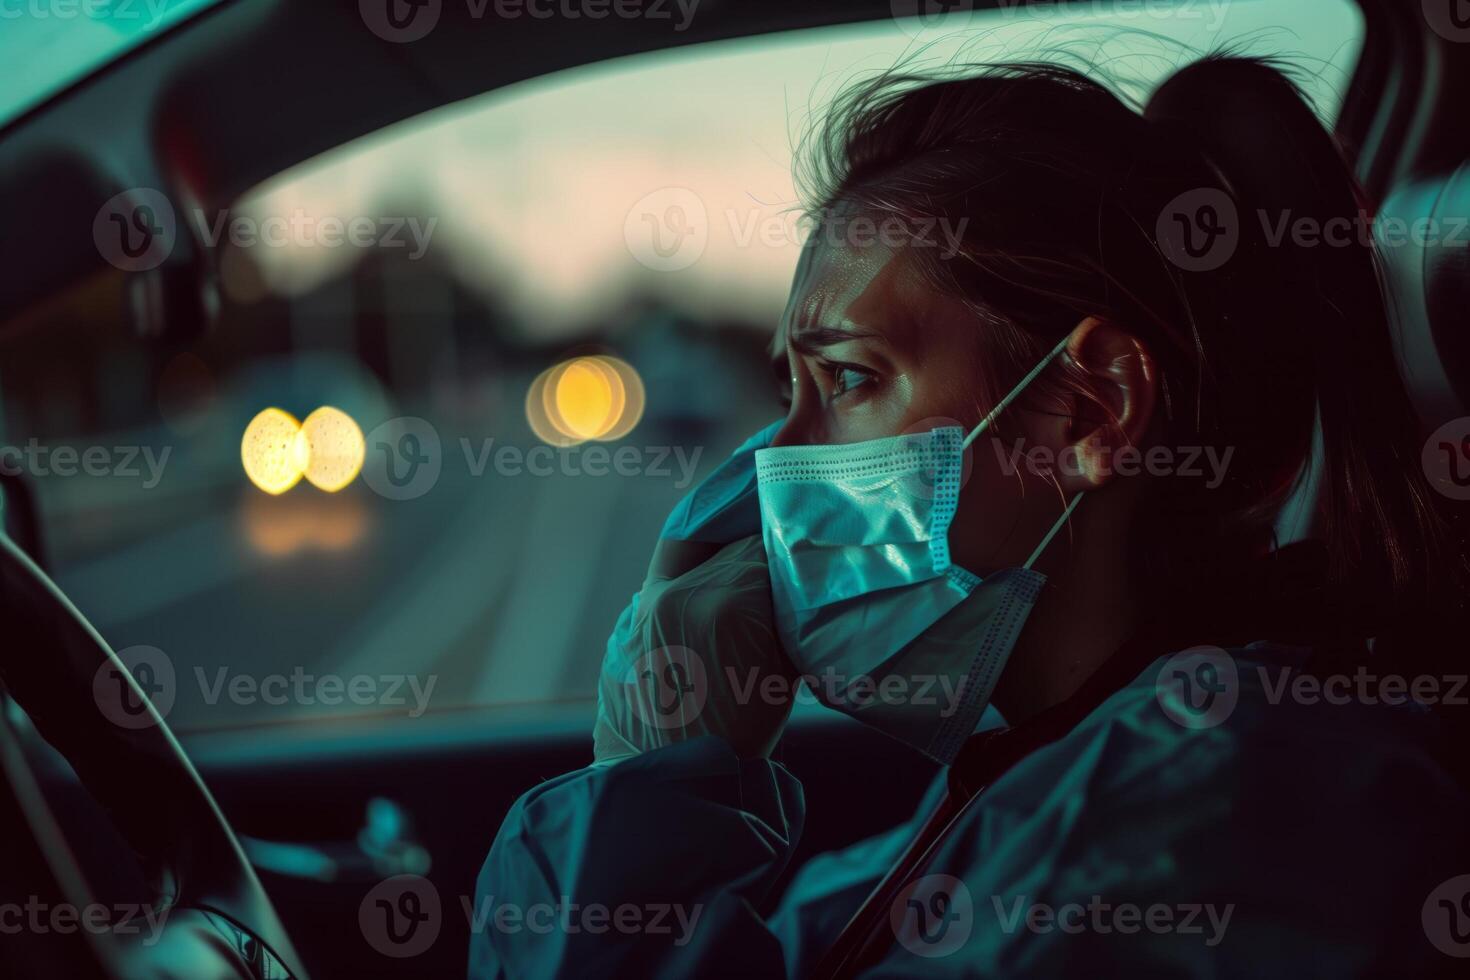 Heart-wrenching image capturing a nurse with tears flowing, seated in her vehicle after a challenging shift photo